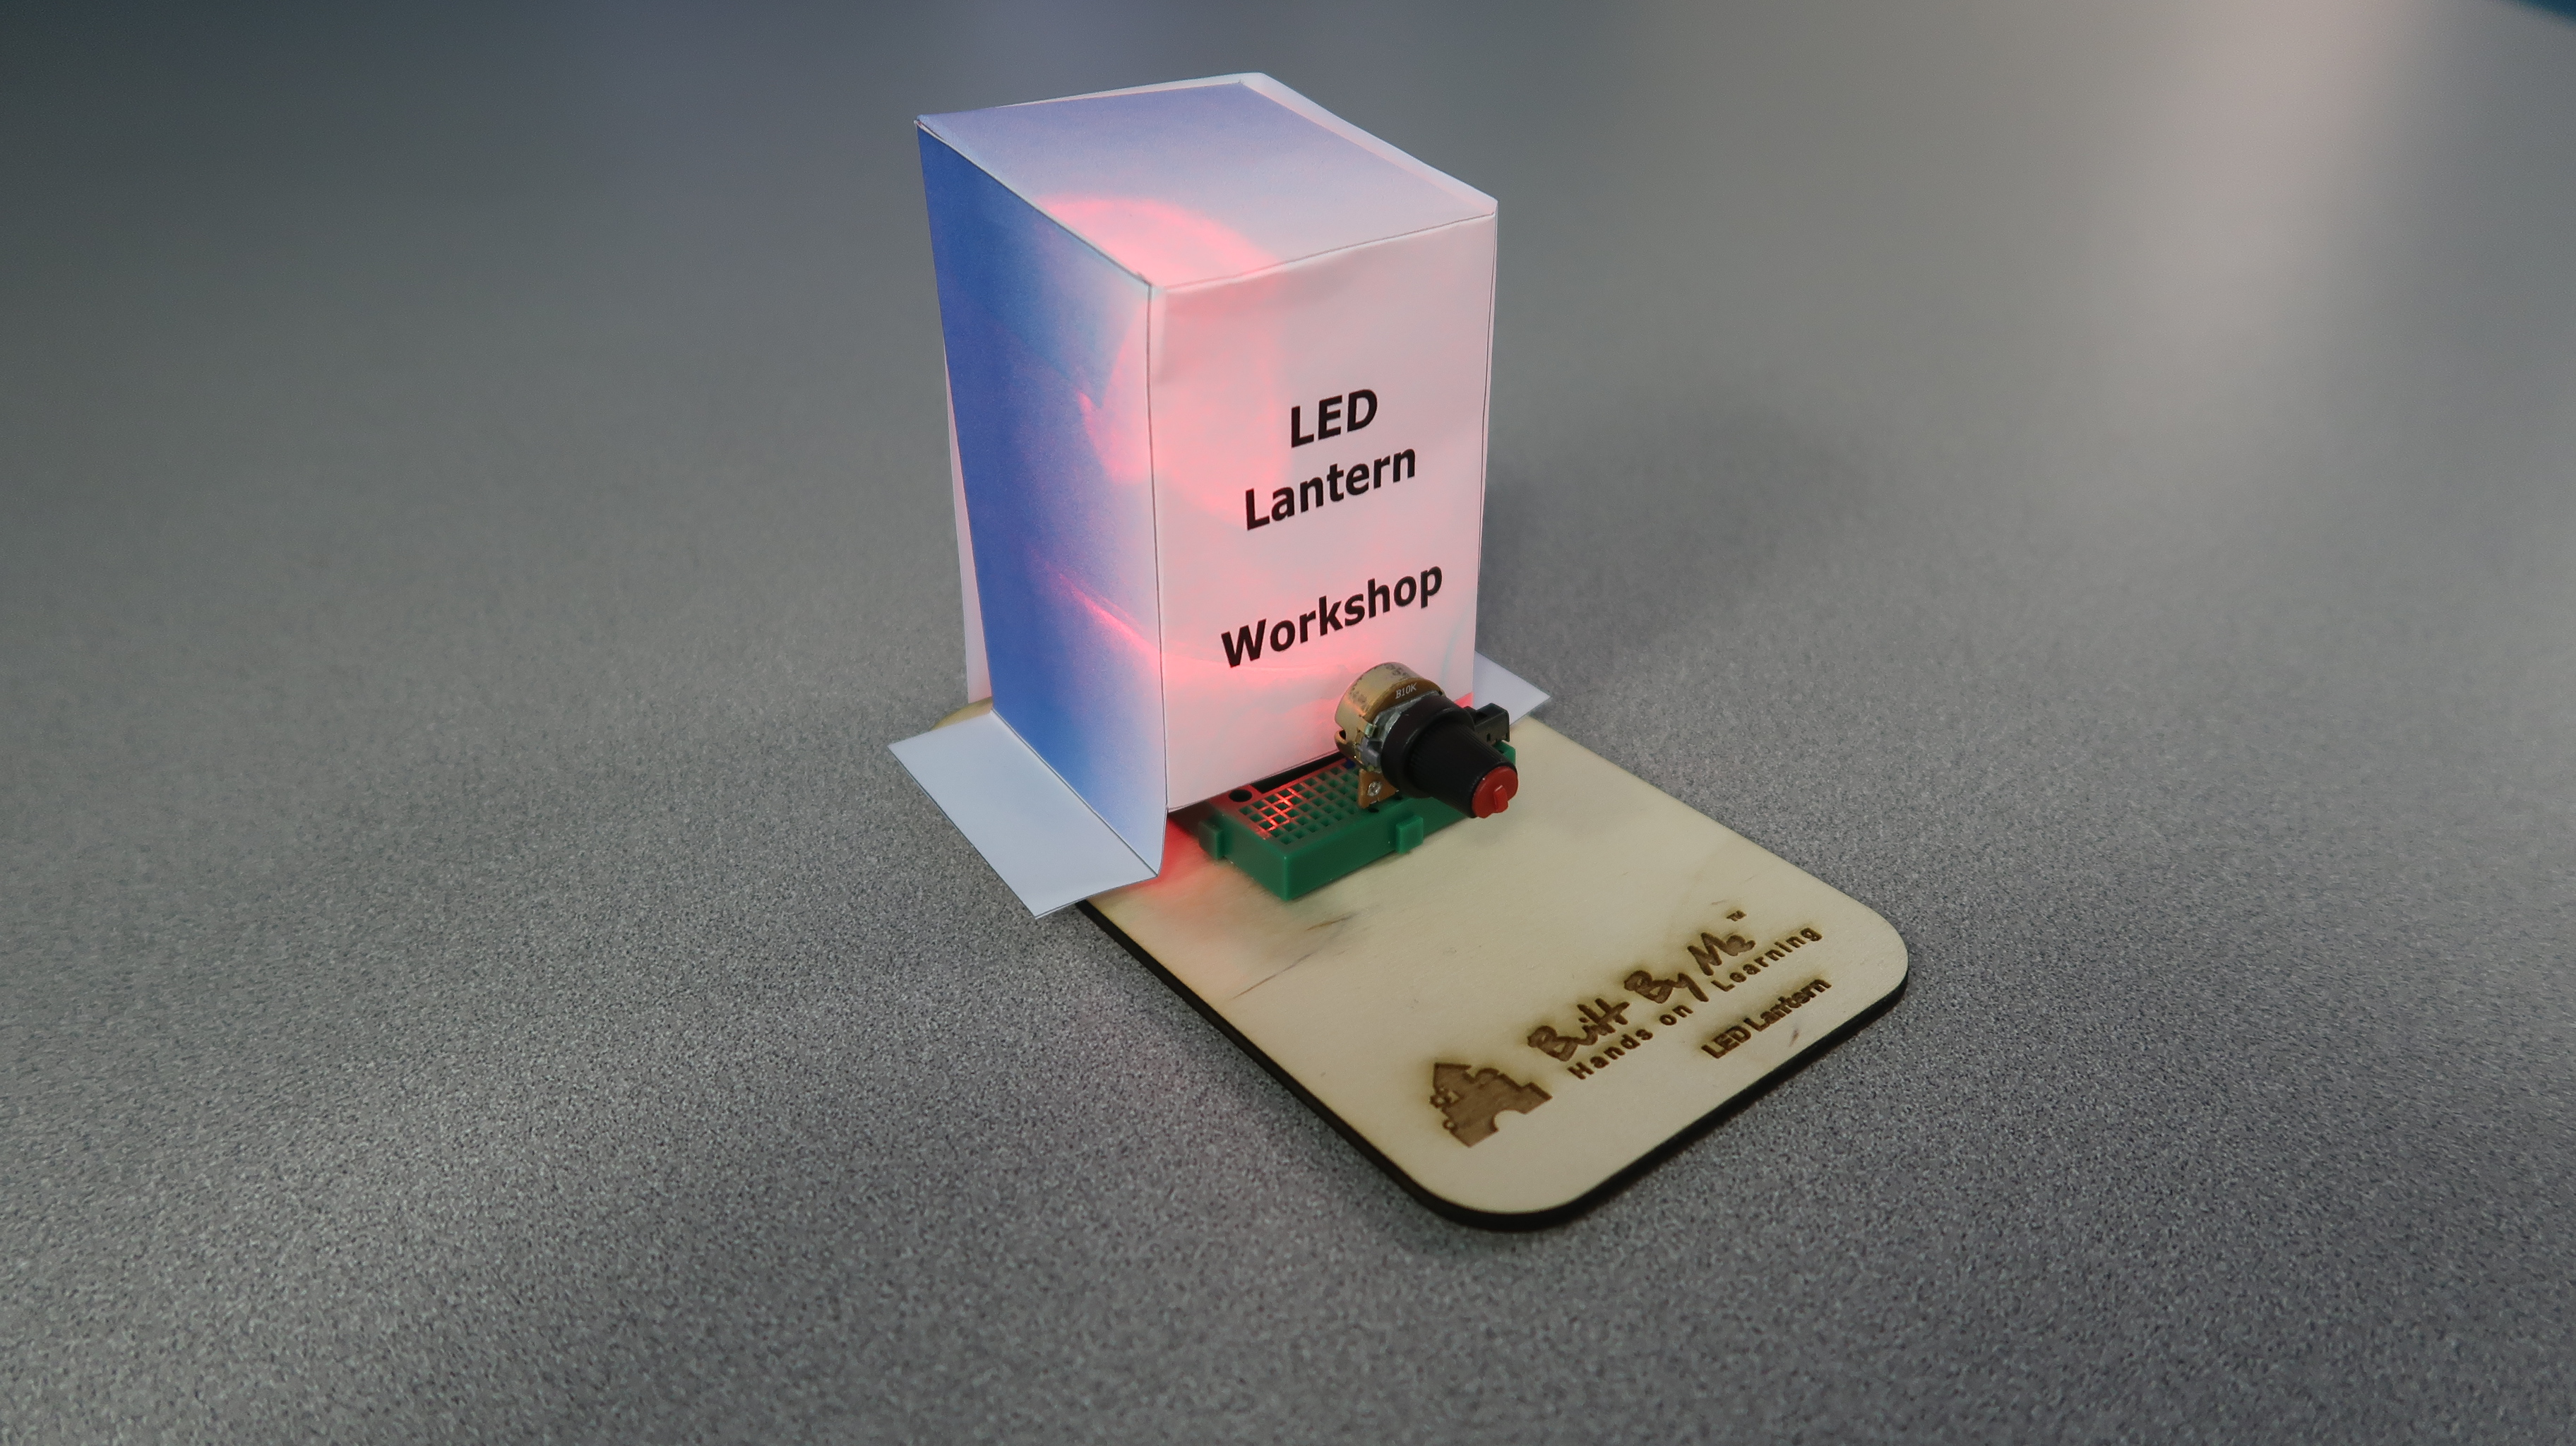 HOLIDAY THEMED SINGLE SESSION - Light-up your personalized LED Lantern